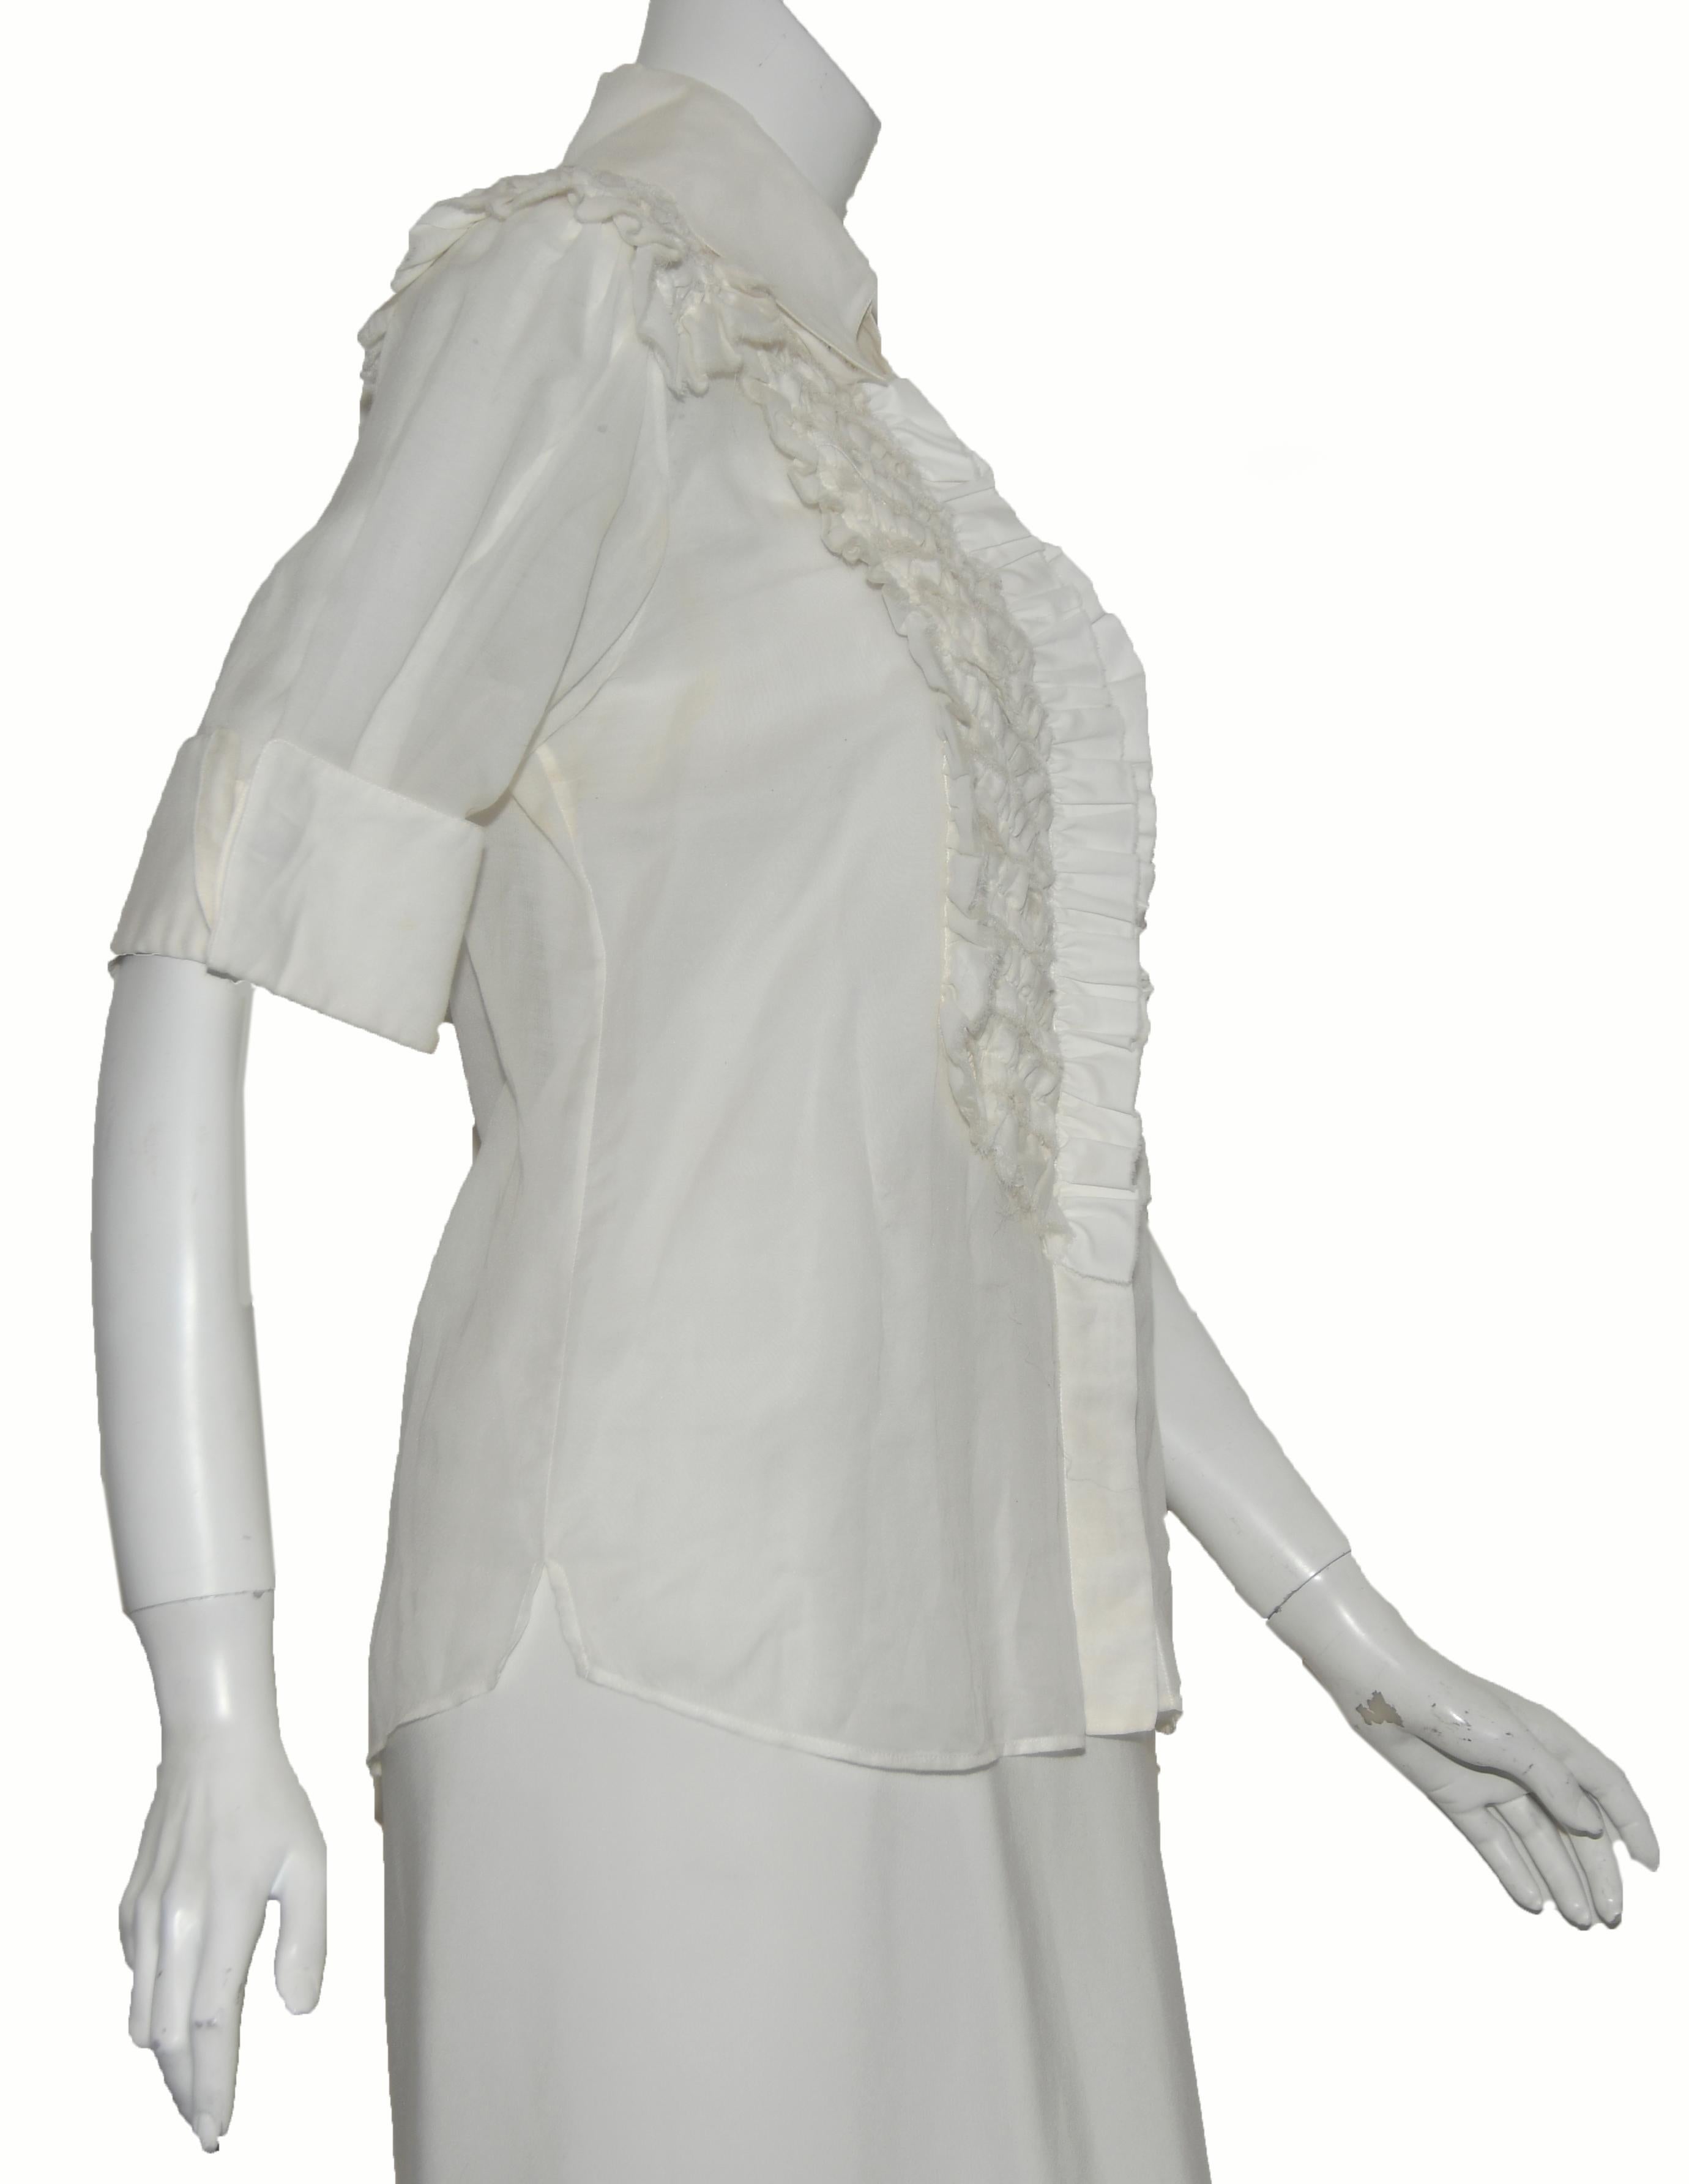 Chanel ivory 3/4 sleeve blouse contains tuxedo style small ruffles at front on each side of opening. The ruffles continue across the shoulders and down the back with a single ruffle placket.  This top is not lined.  On the sleeves a single CC button